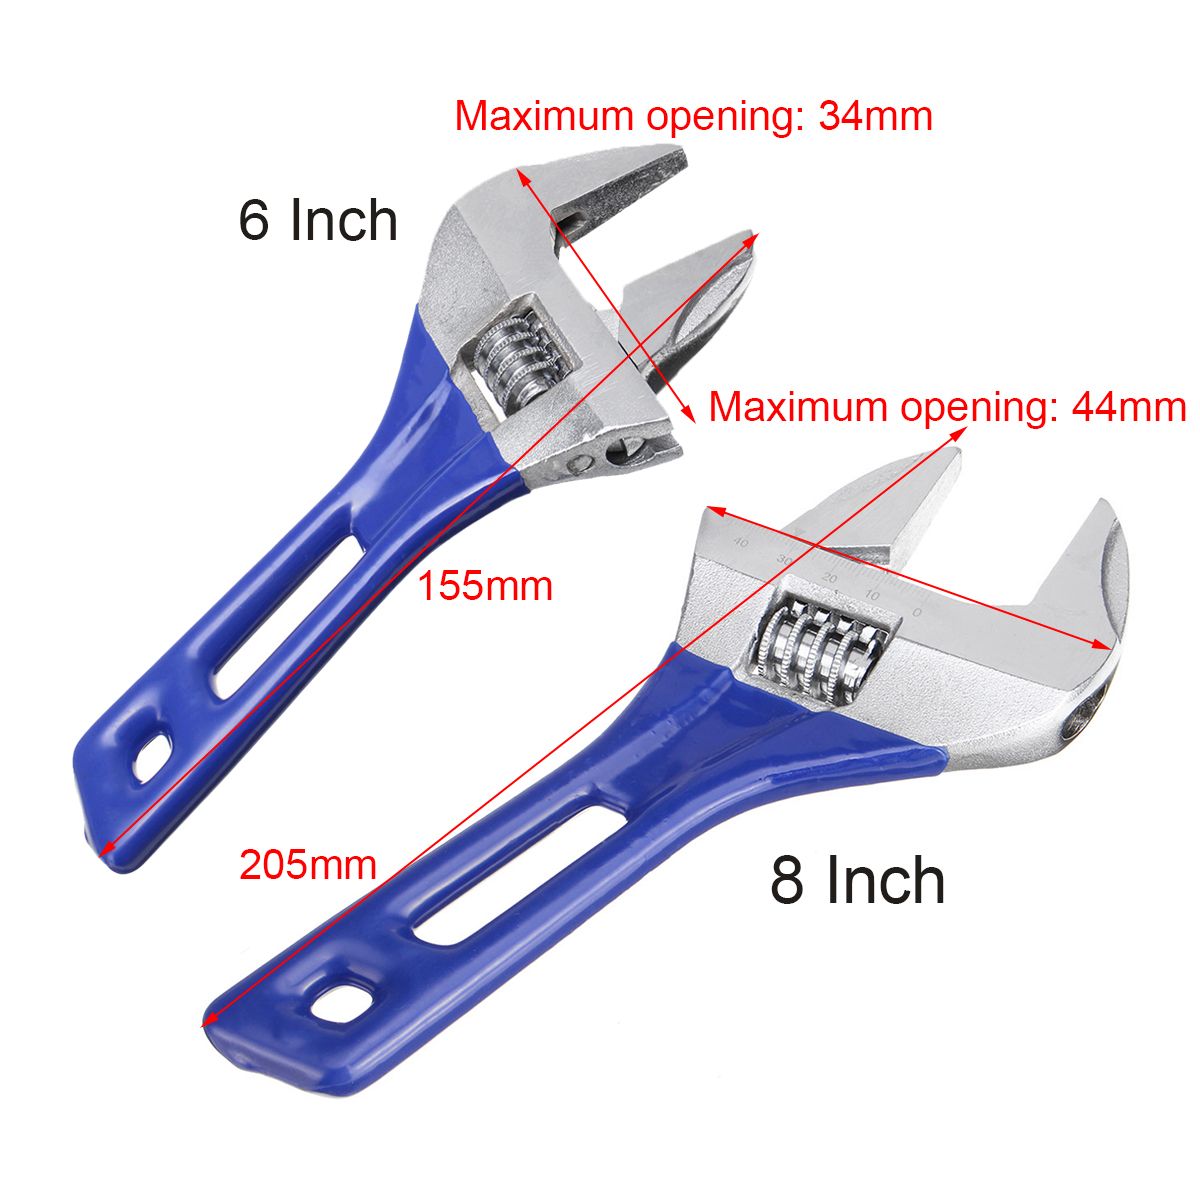 6inch-8inch-Wrench-Spanners-Chromic-Plating-Adjustable-Large-Opening-Handle-Shank-with-Scale-1446445